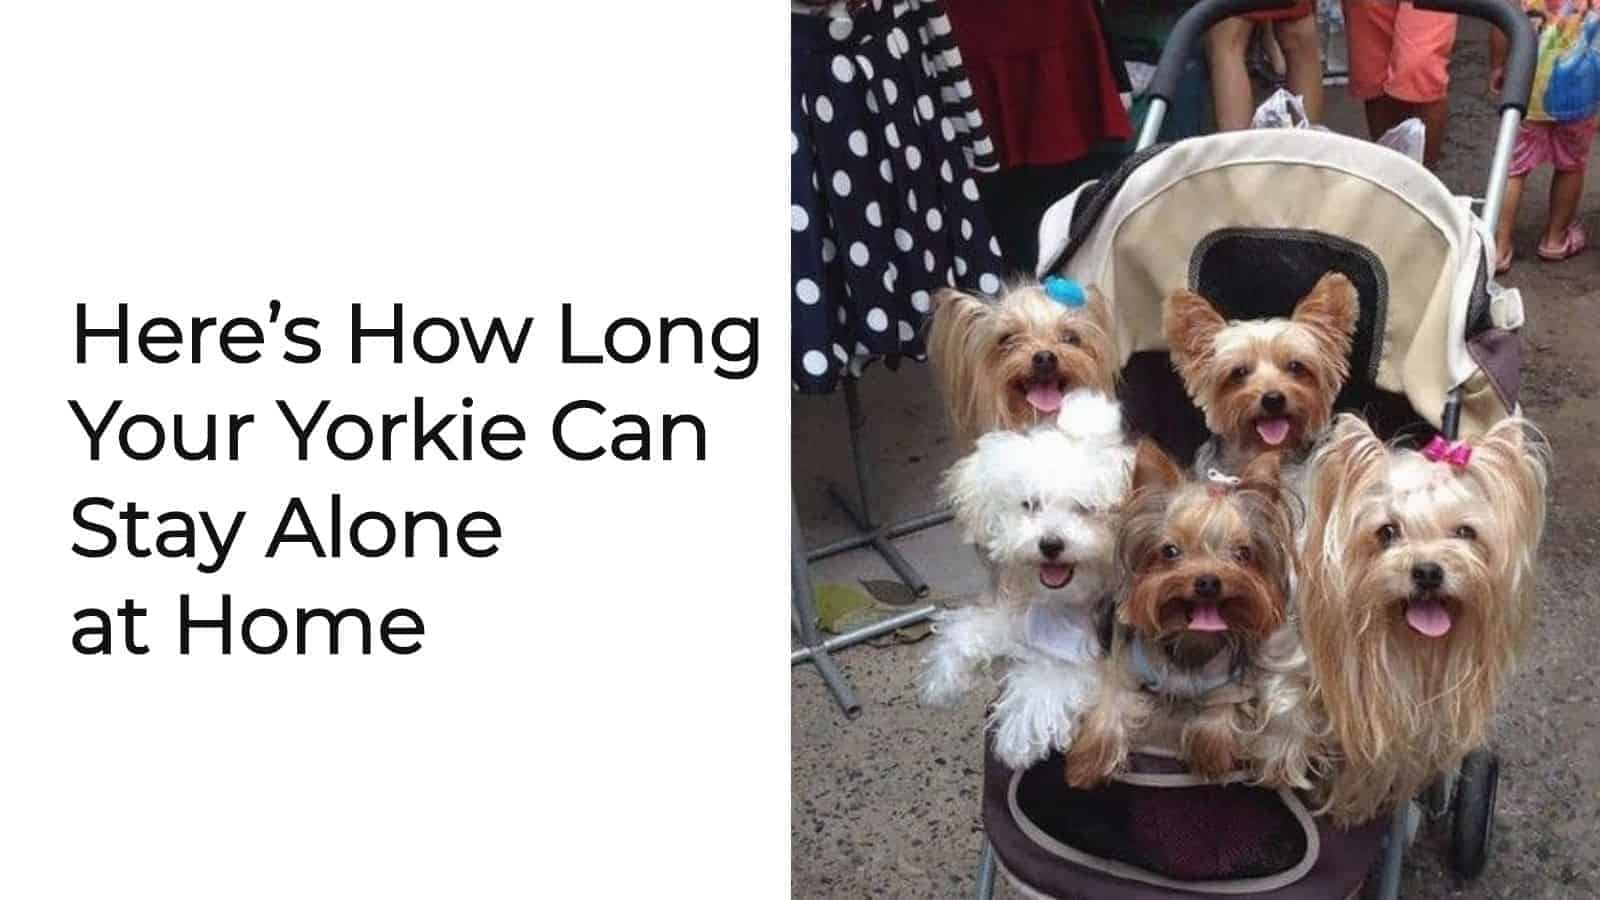 can yorkie stay home alone?